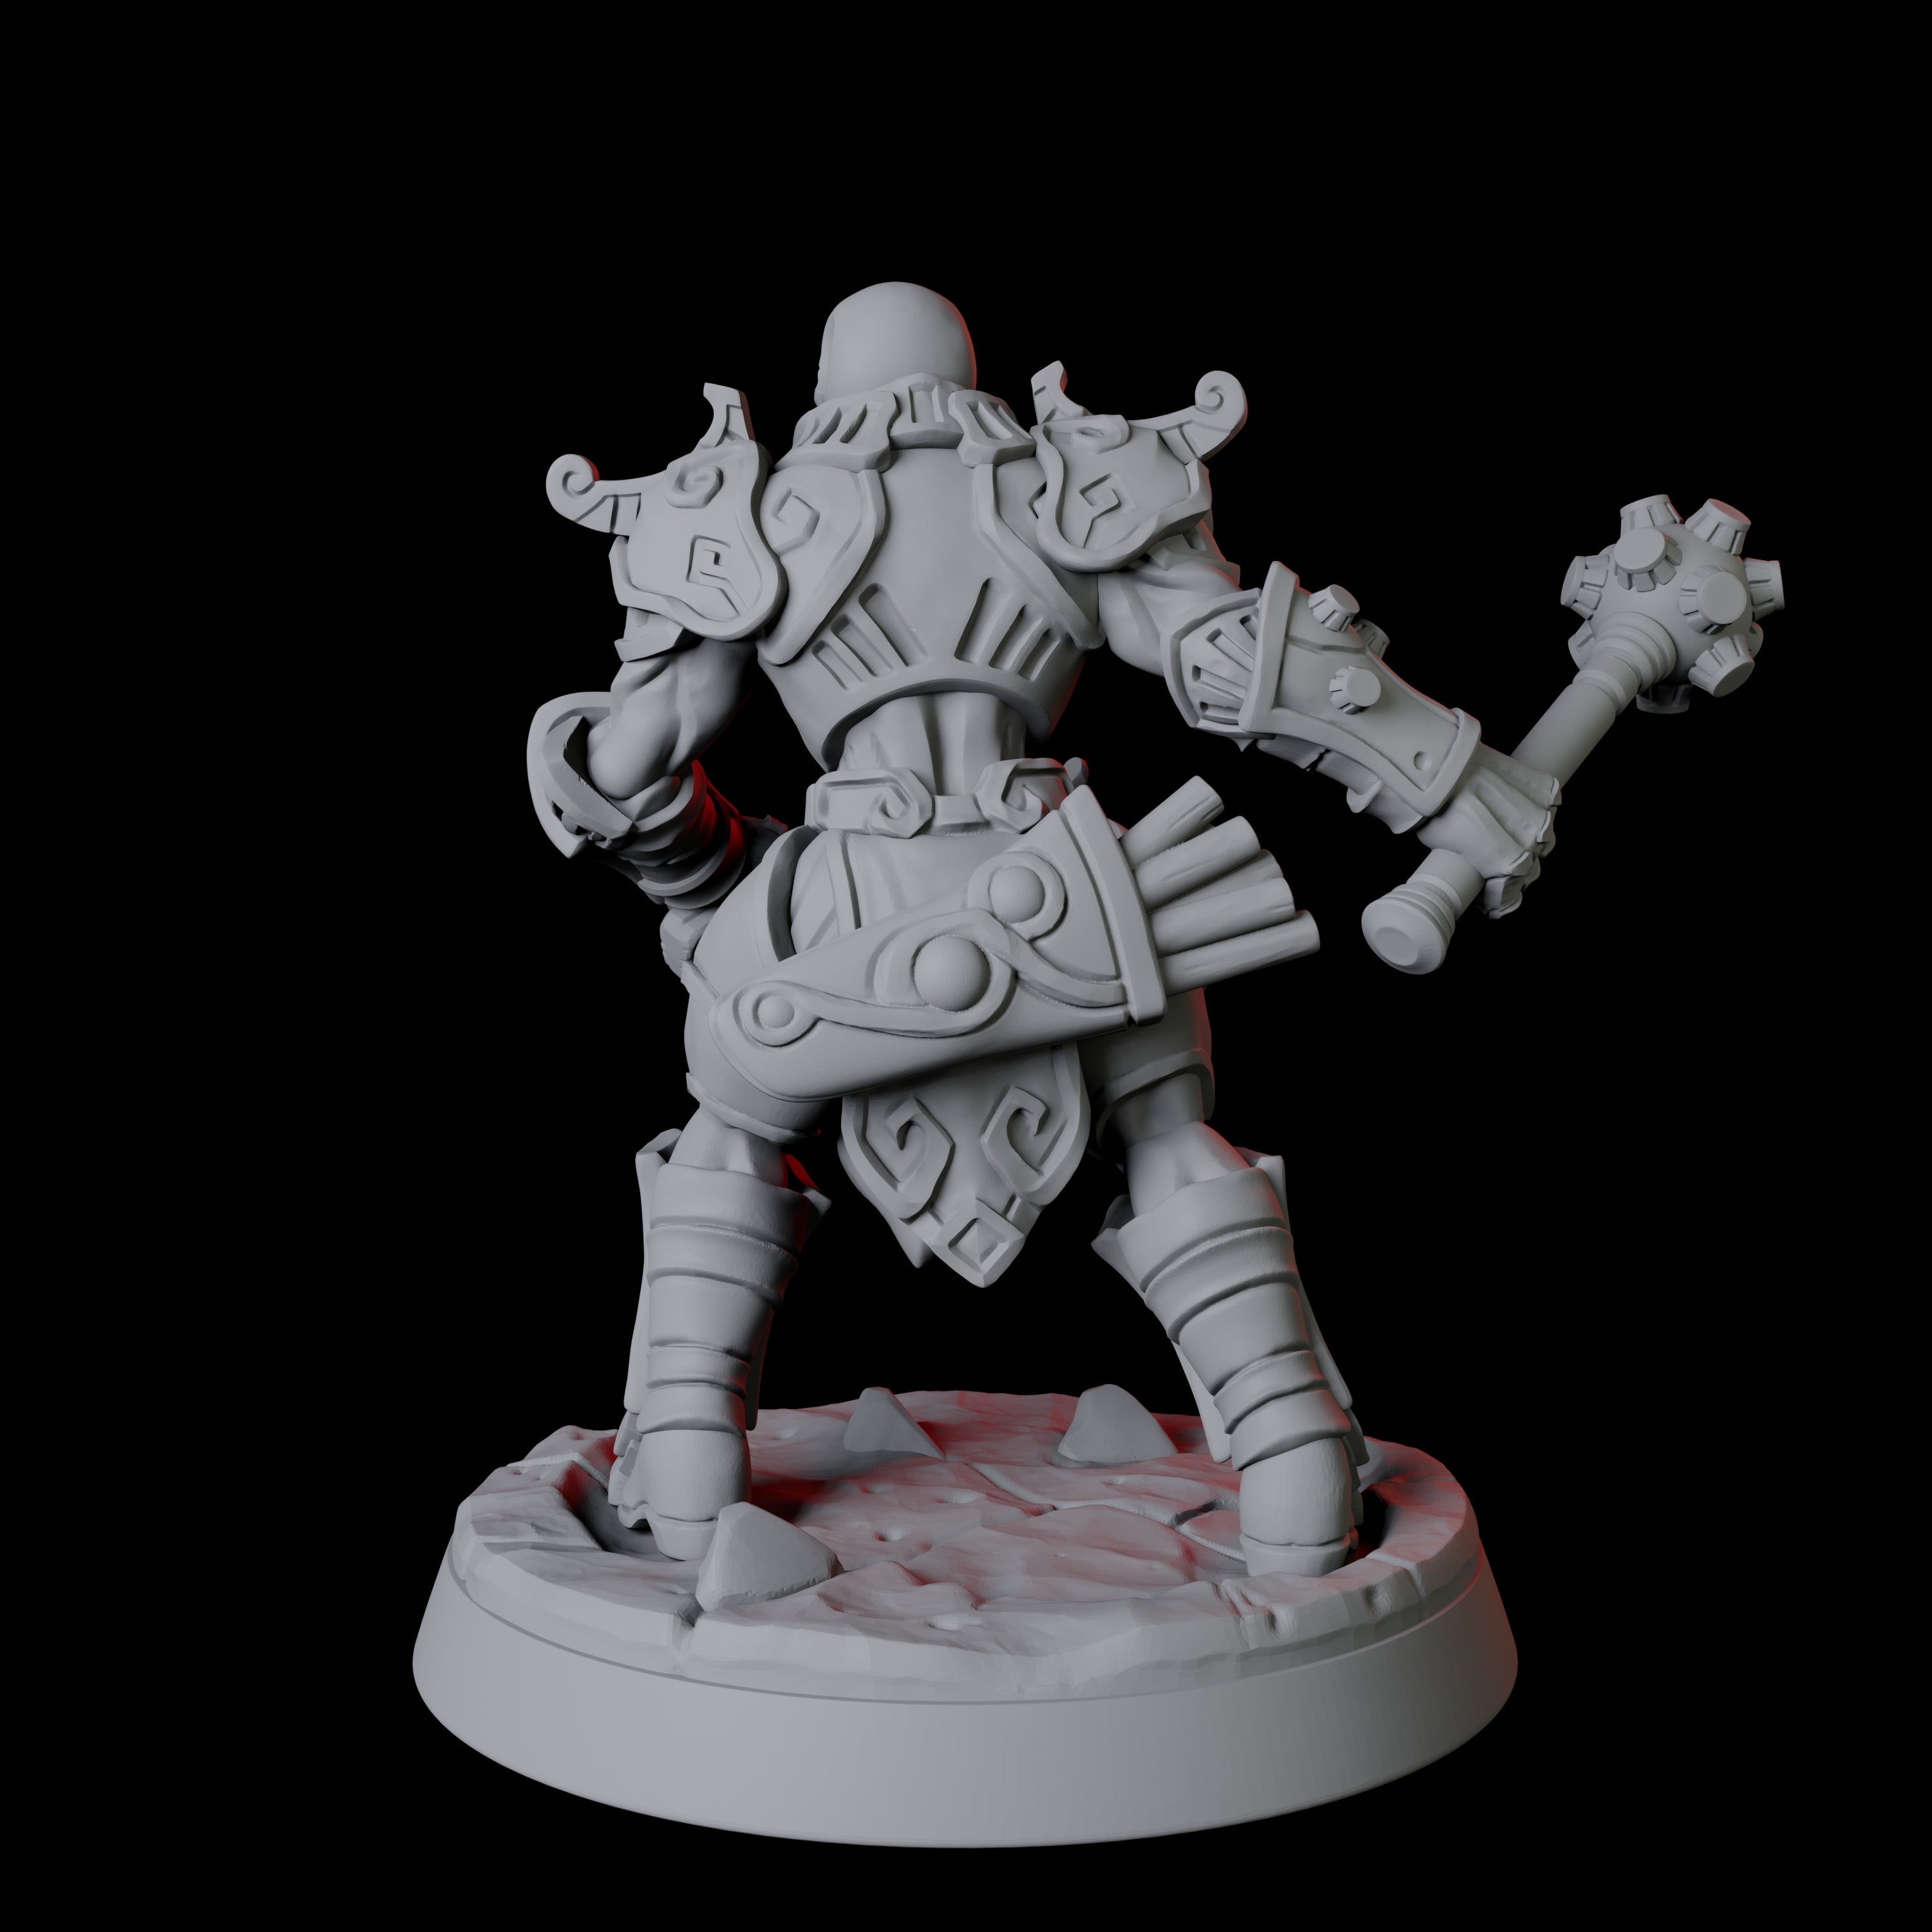 Battle-Ready Warforged D Miniature for Dungeons and Dragons, Pathfinder or other TTRPGs